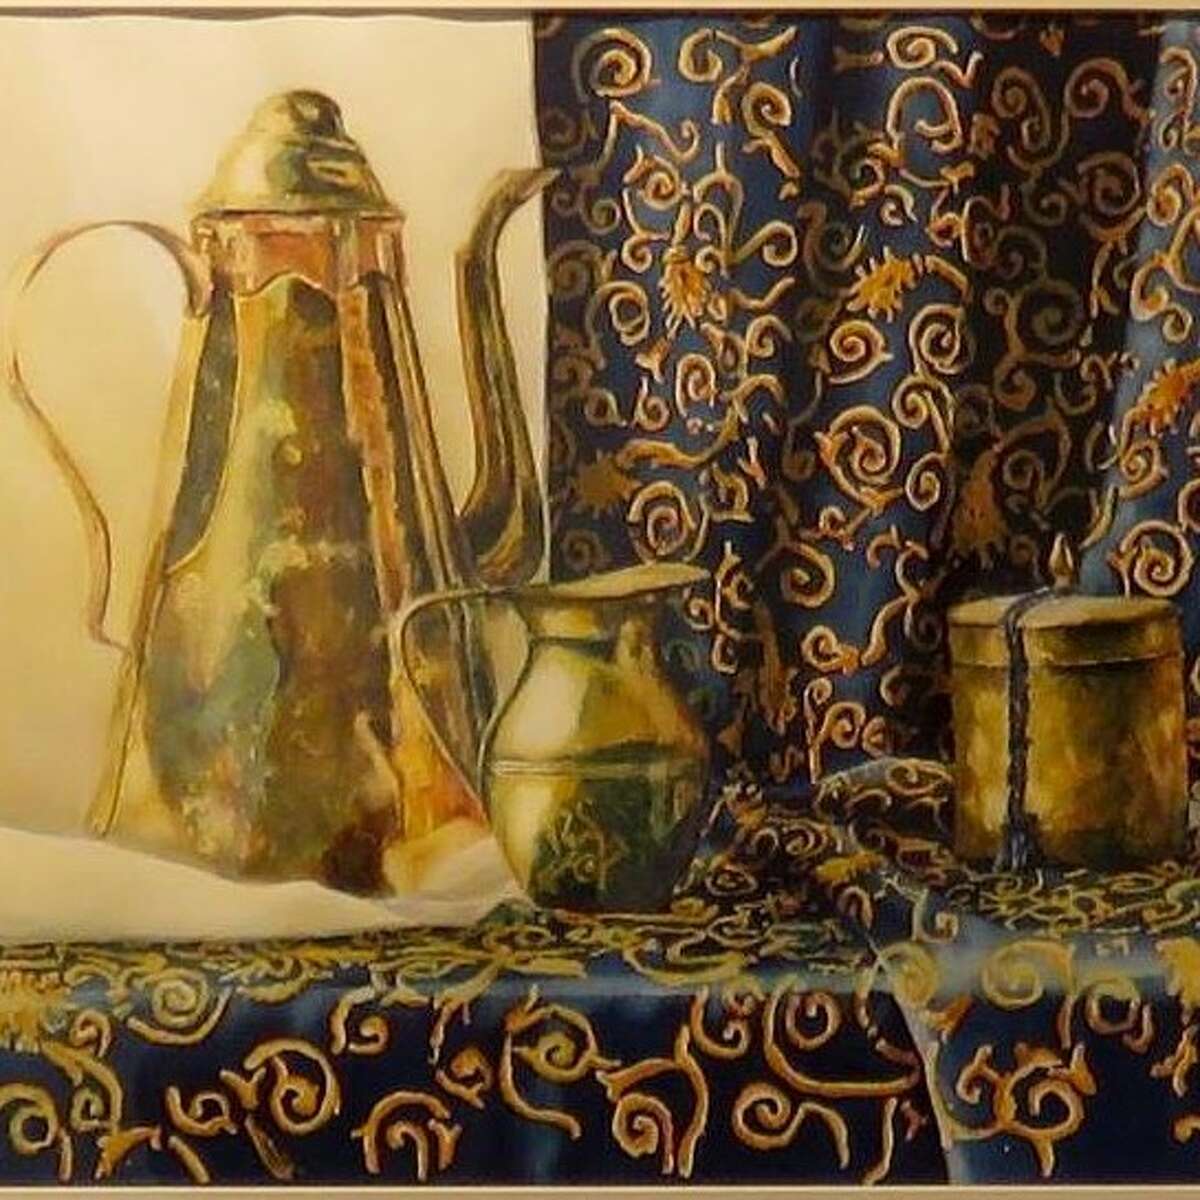 A watercolor painting titled "Belgian Coffee Pot" by Terri Baehr Harris, whose work will be featured in a show titled "Orange Obsession" at the Central Market Fine Art Gallery in downtown Conroe throughout the month of October.